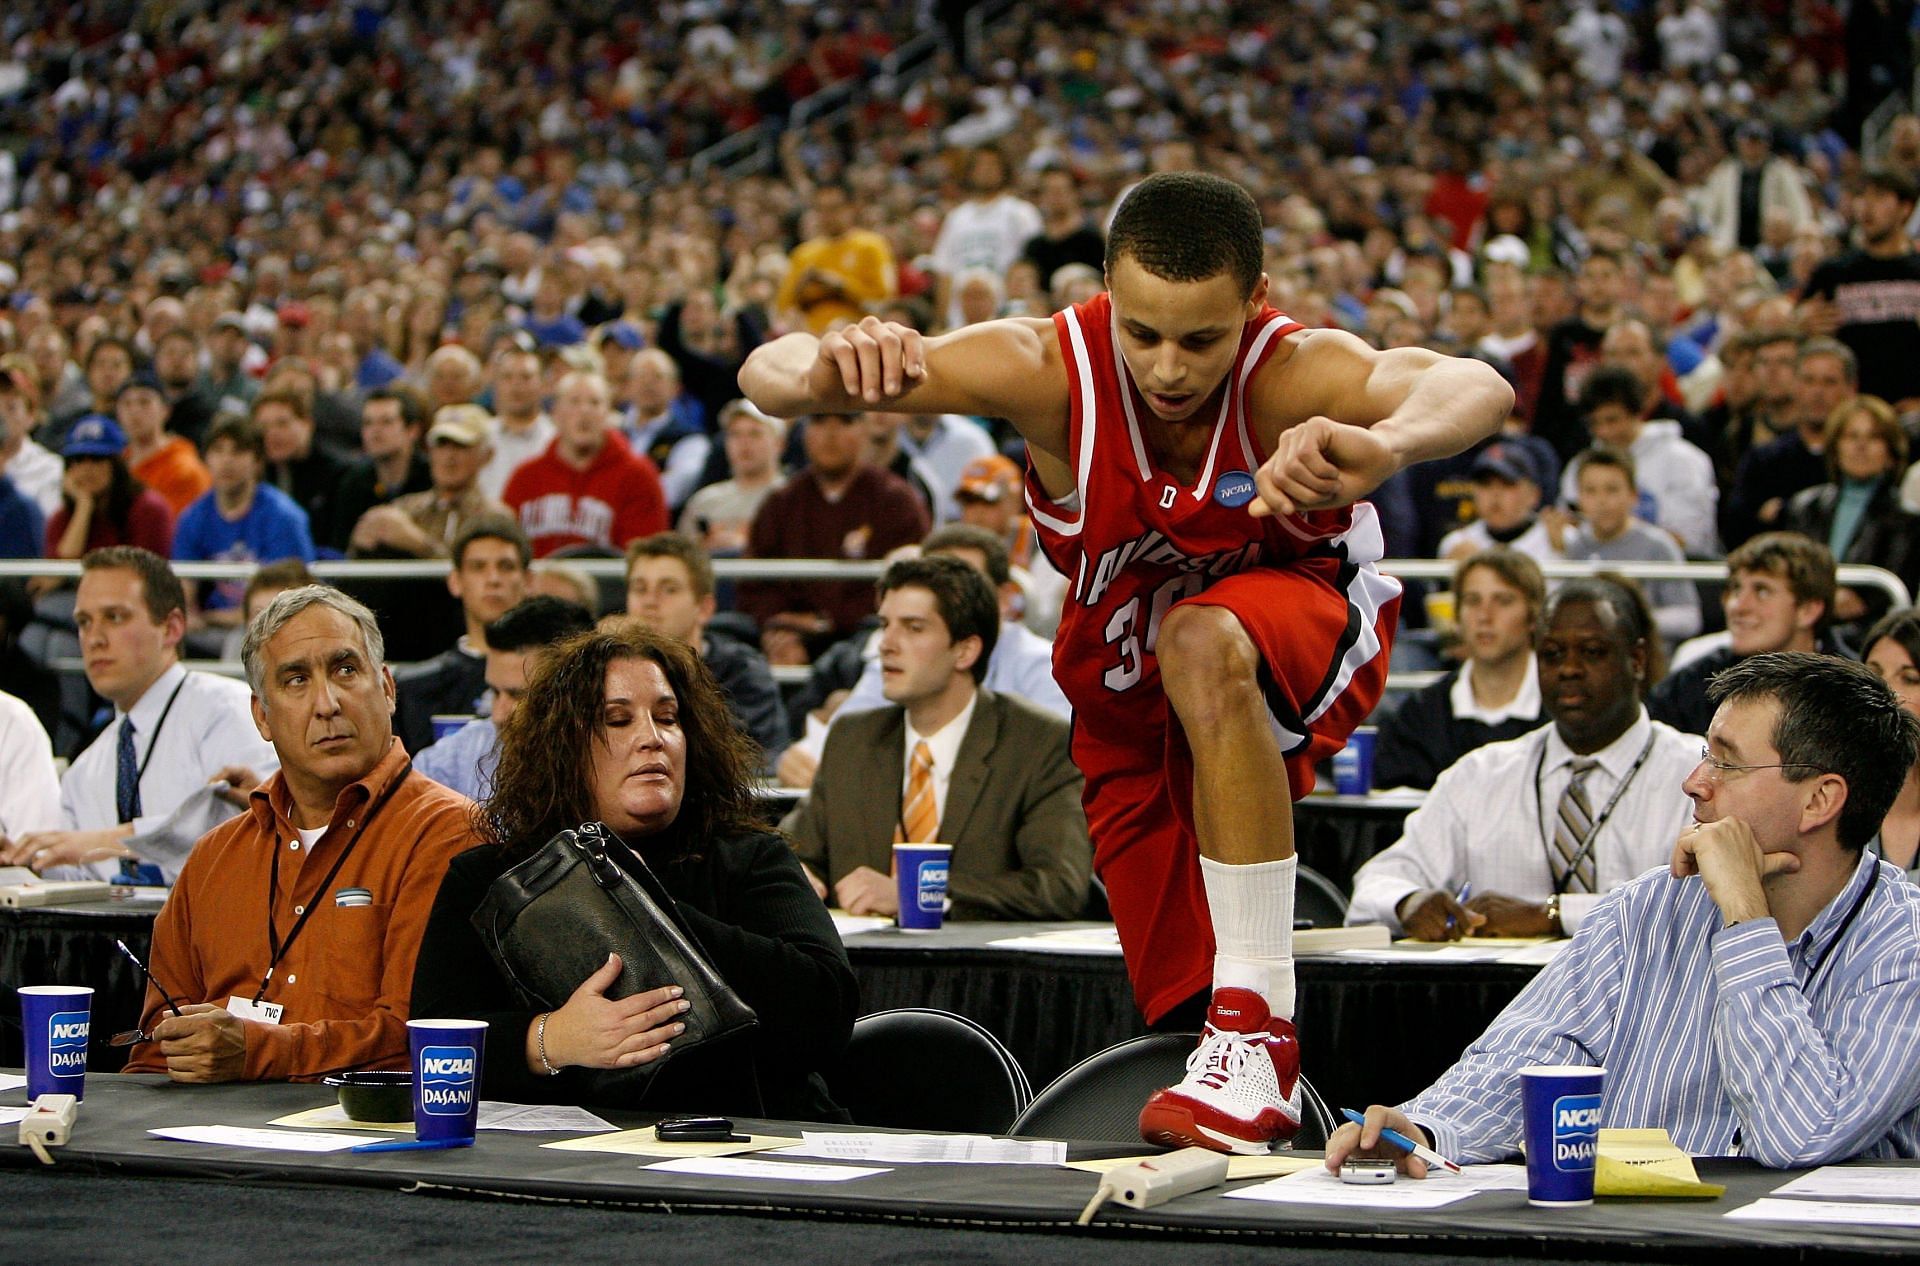 Steph Curry during his time at Davidson in March Madness.